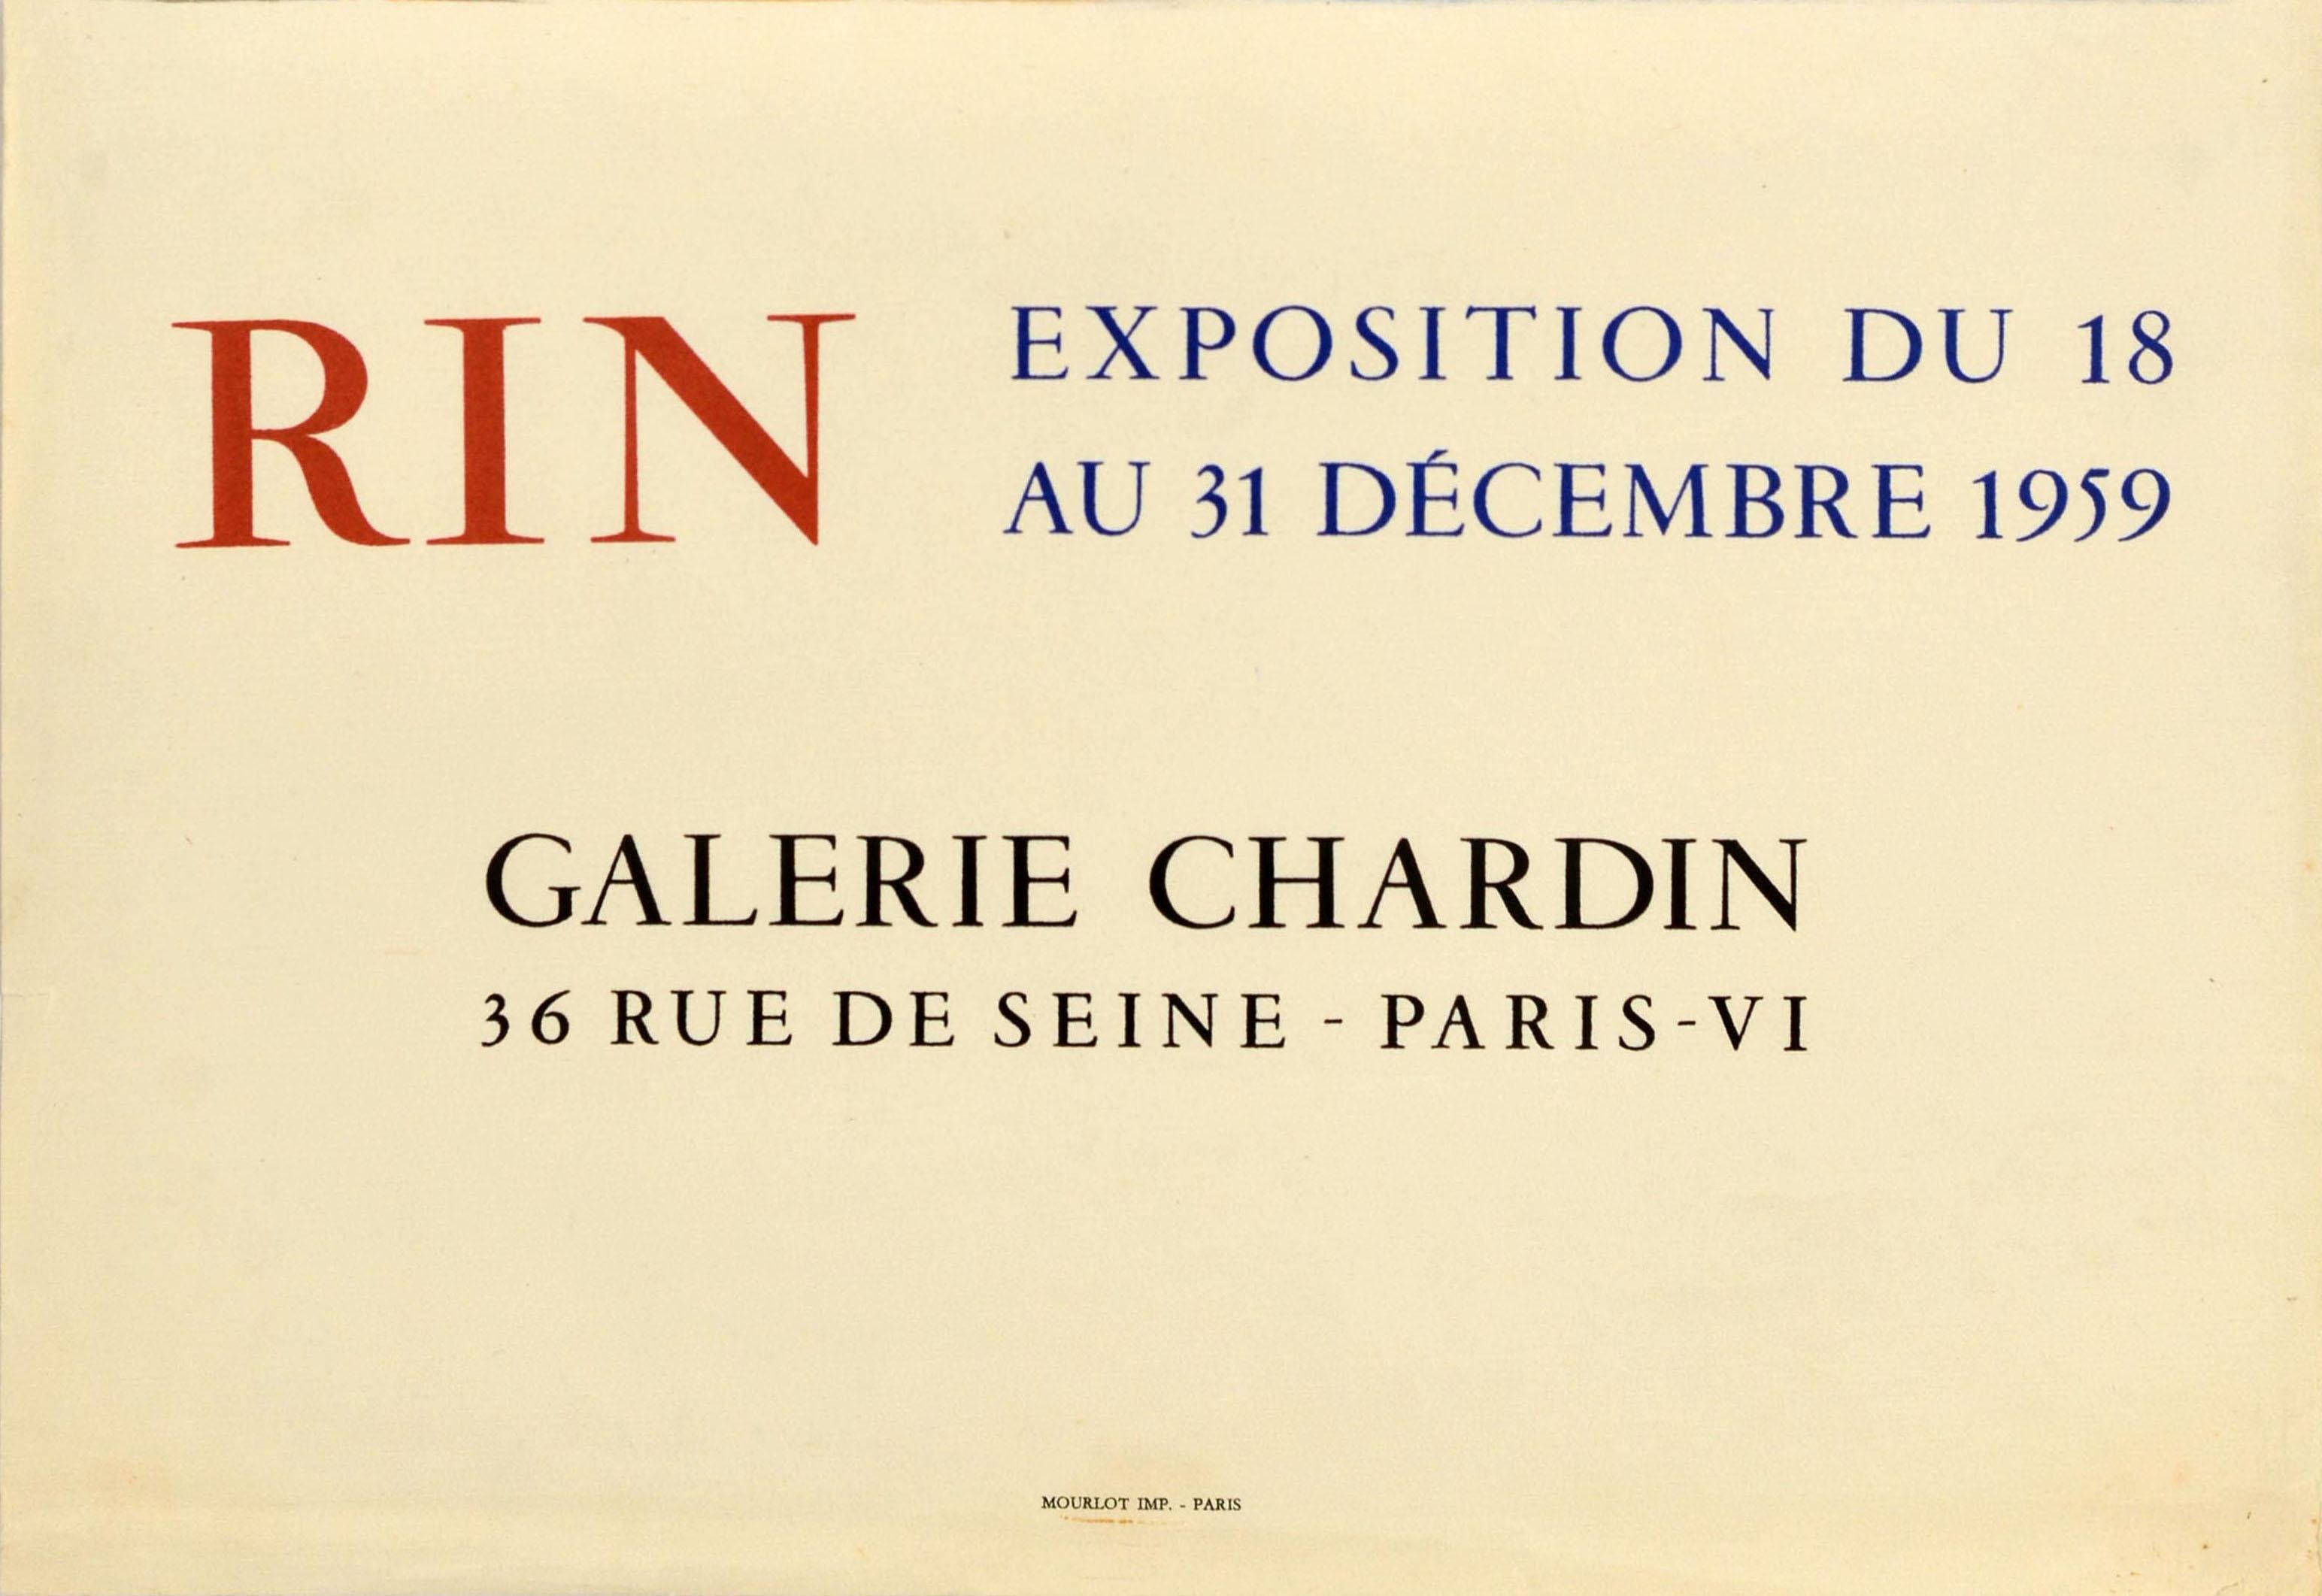 Original Vintage Art Exhibition Poster Nicolas Rin Galerie Chardin Abstract In Good Condition For Sale In London, GB